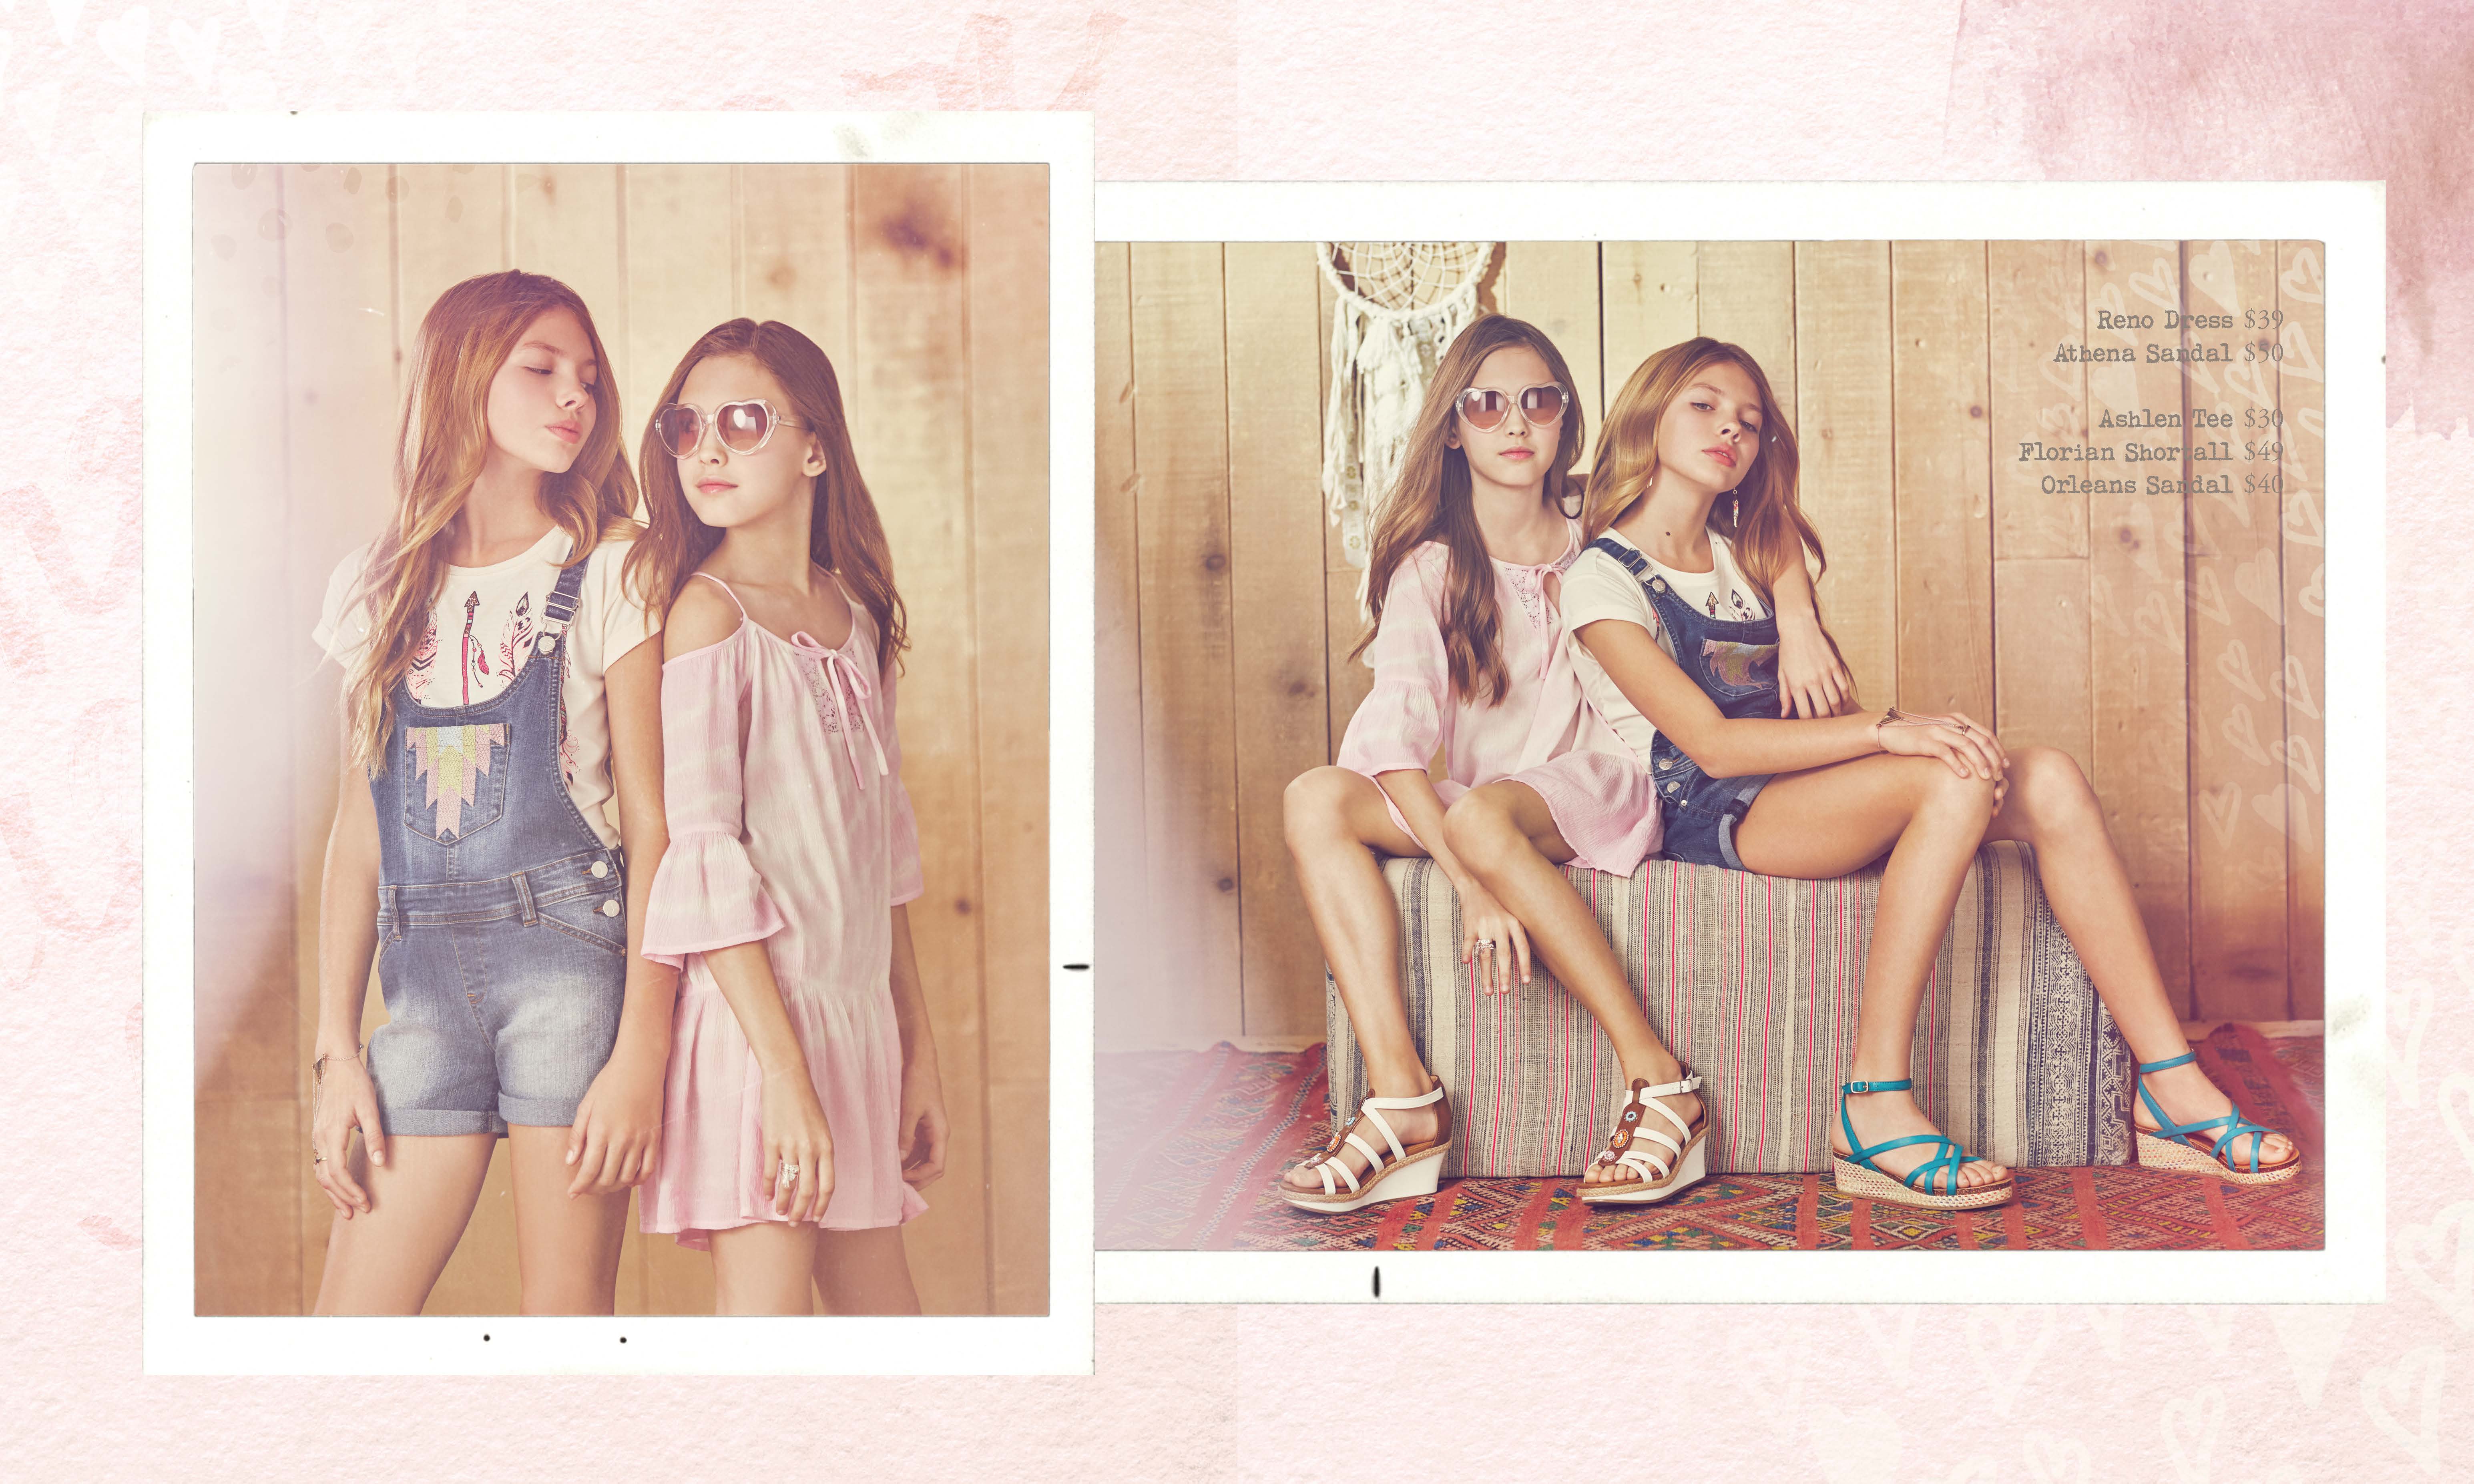 A Fancy Girl Must - Jessica Simpson Girls 2016 Spring Collection6180 x 3708